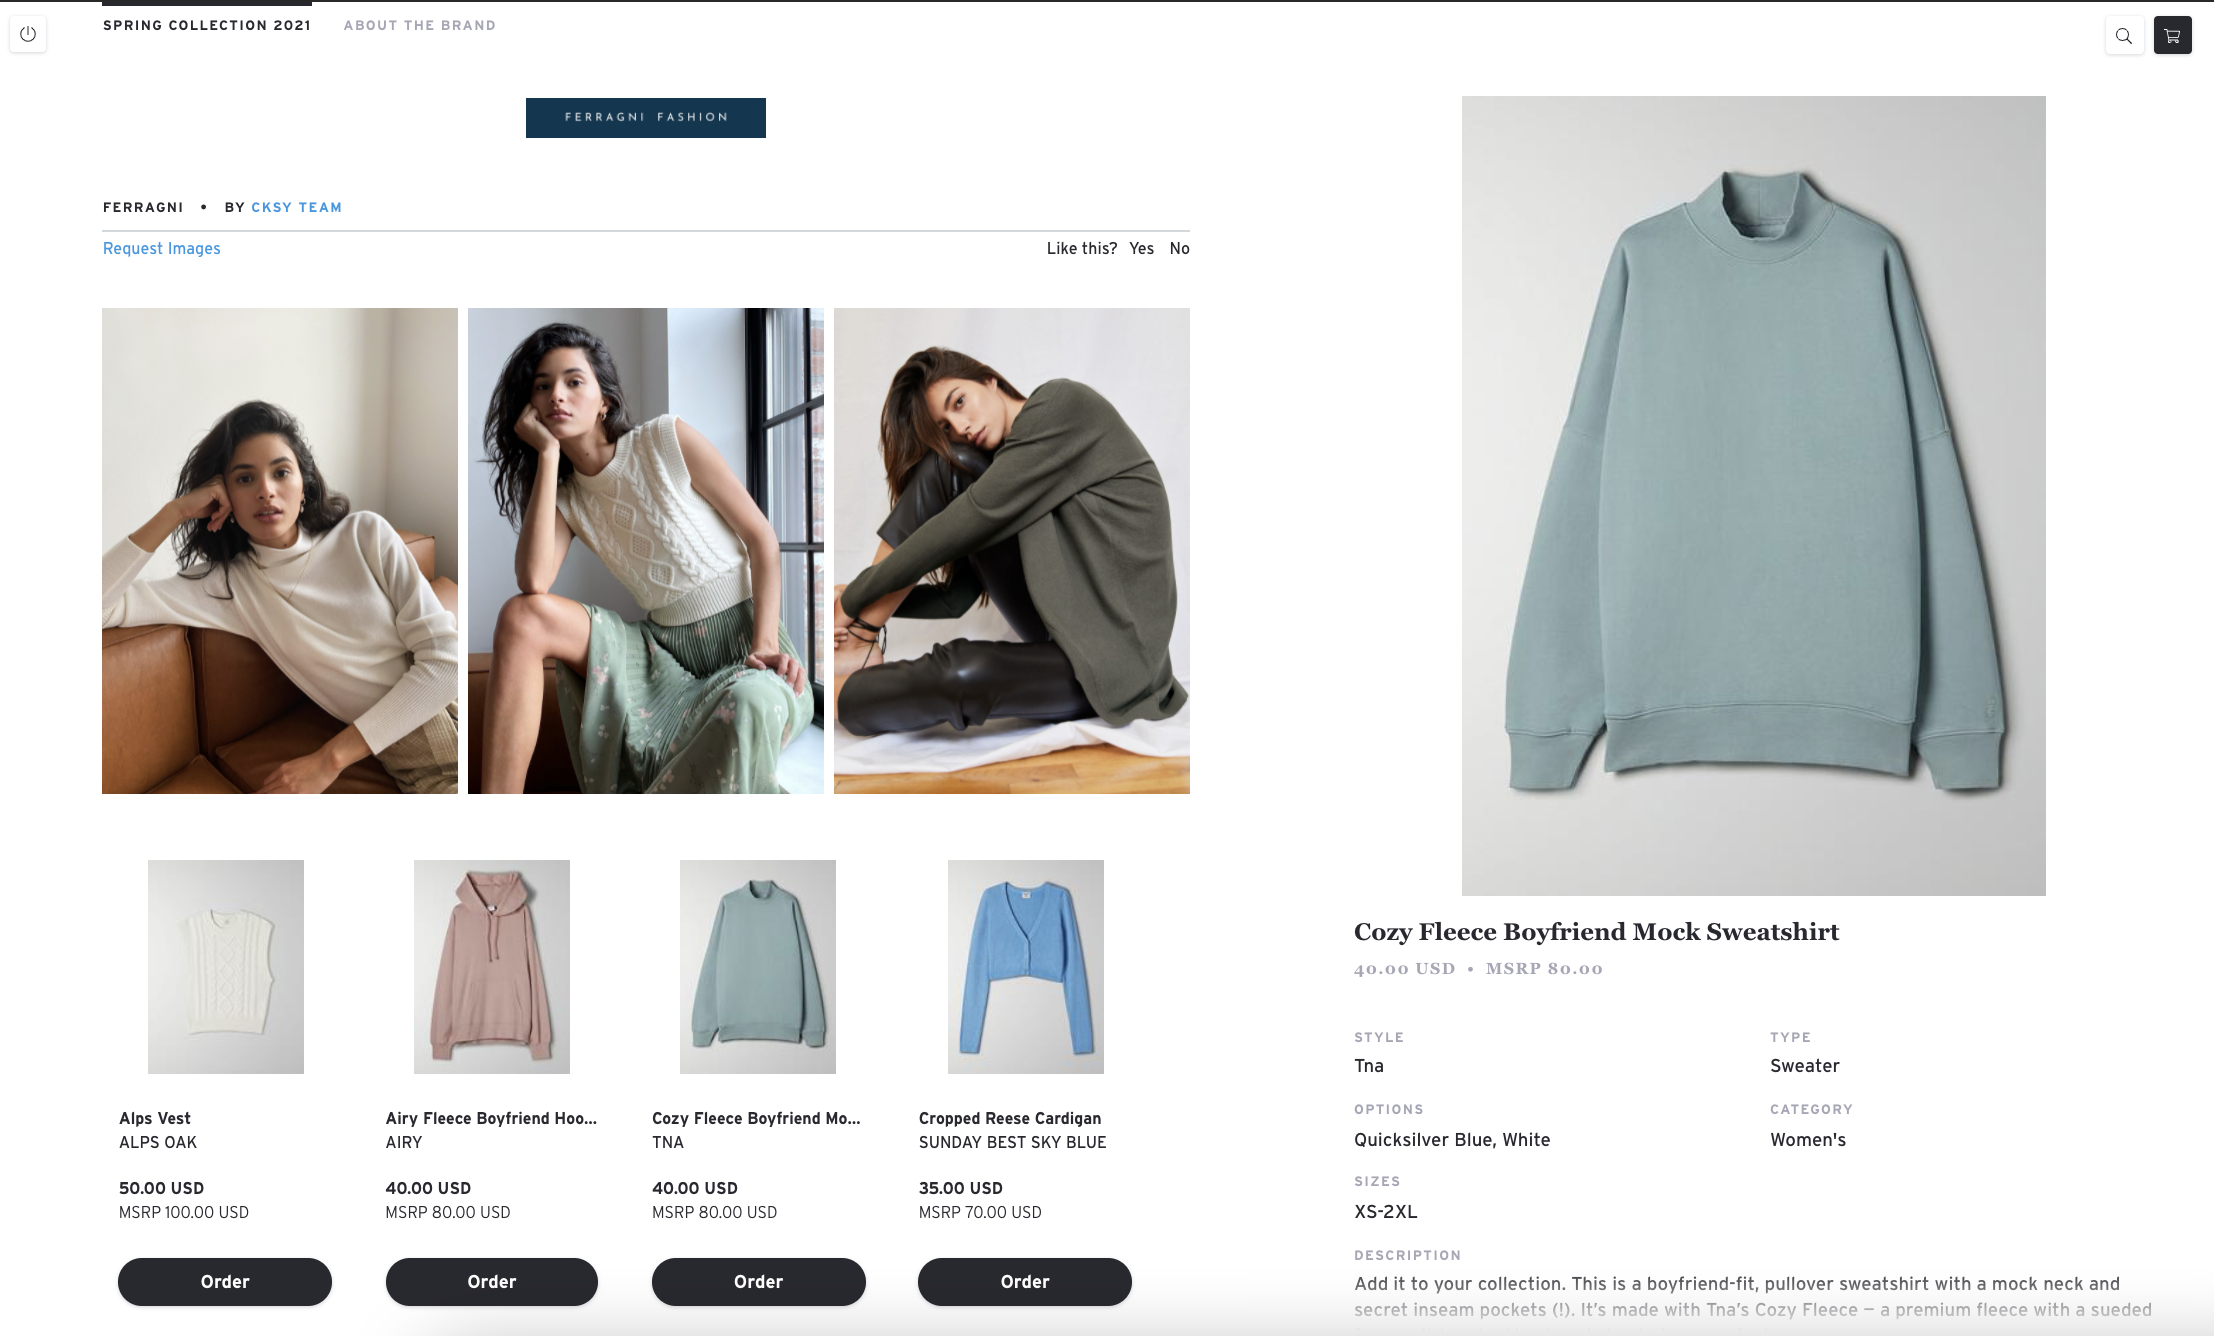 Interactive Cloud-Based Line Sheets. Buyers can browse collection and place orders directly through the Brandboom line sheet.